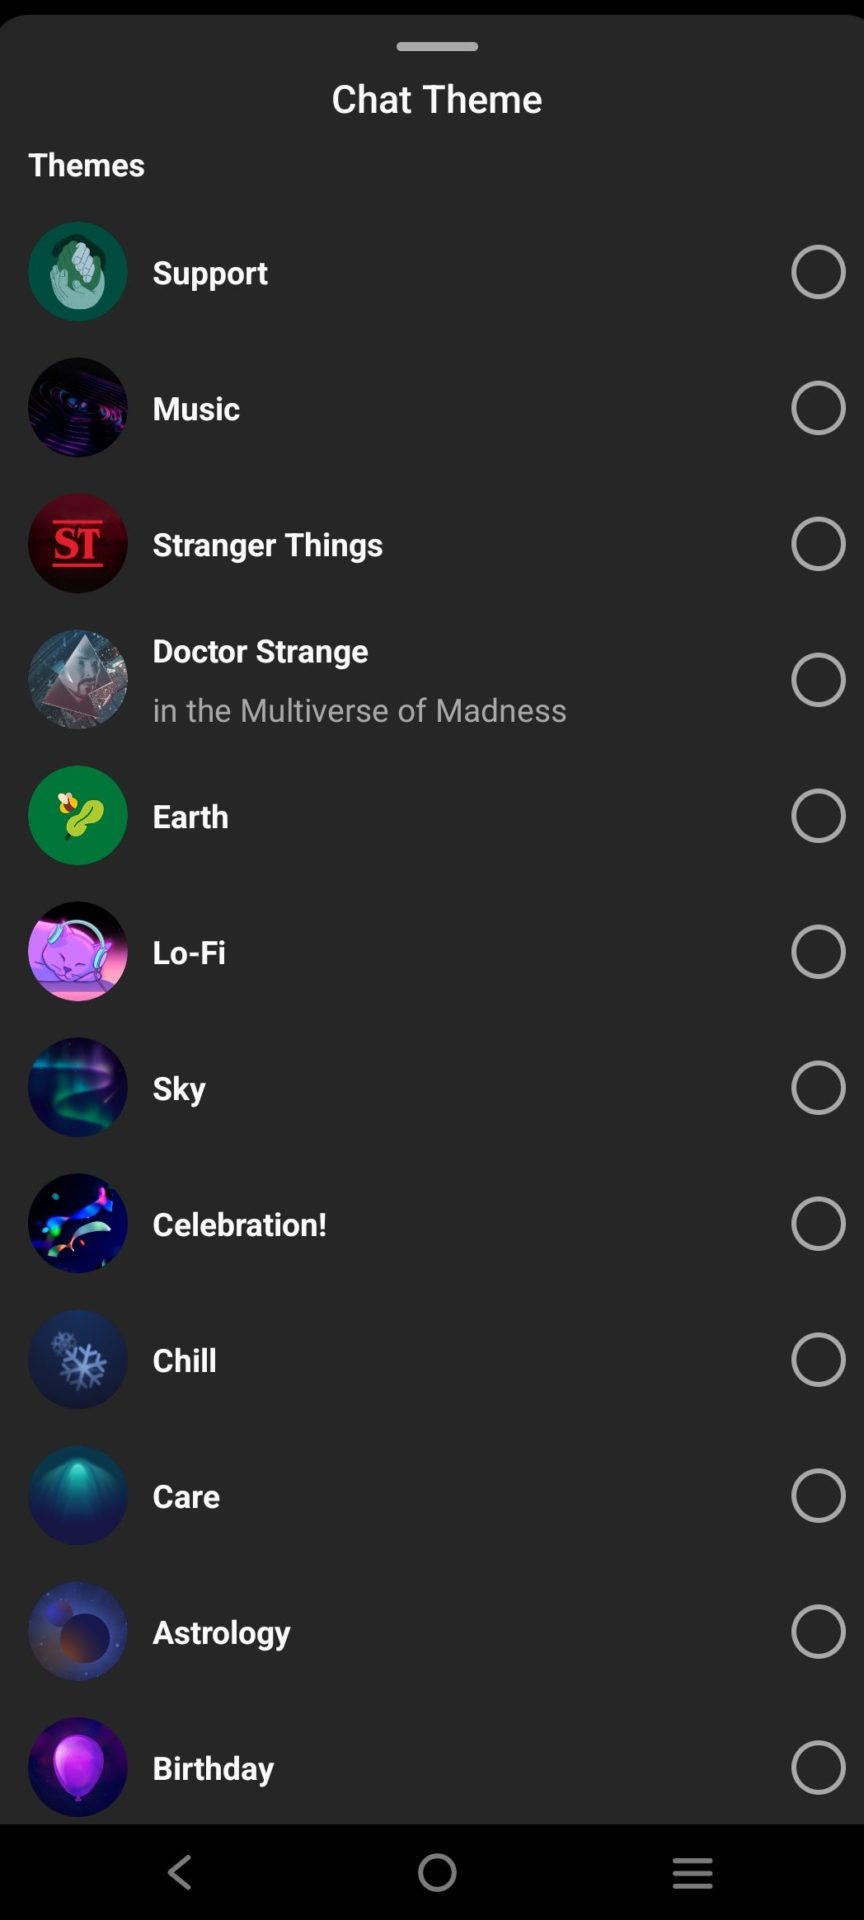 Chat Themes to choose from